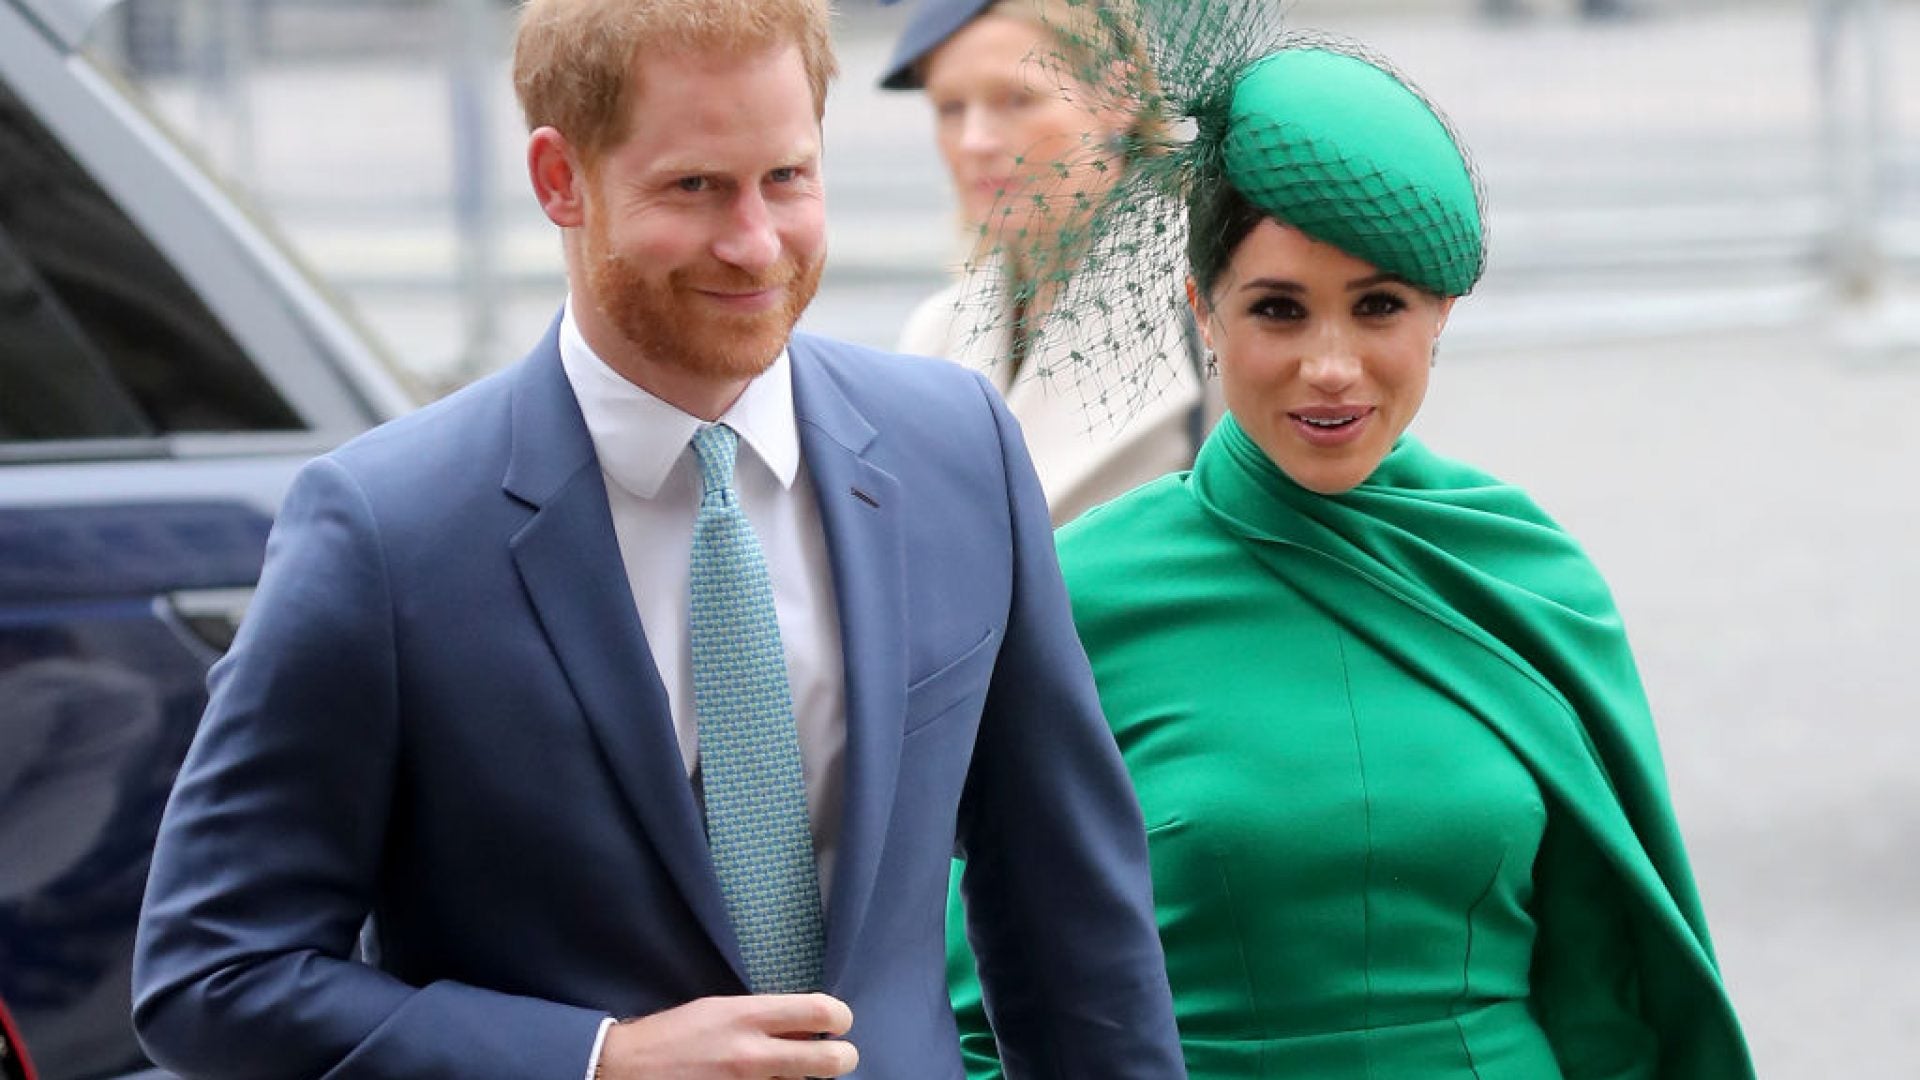 Spotify Announces Multi-Year Podcast Partnership Deal With Meghan Markle and Prince Harry